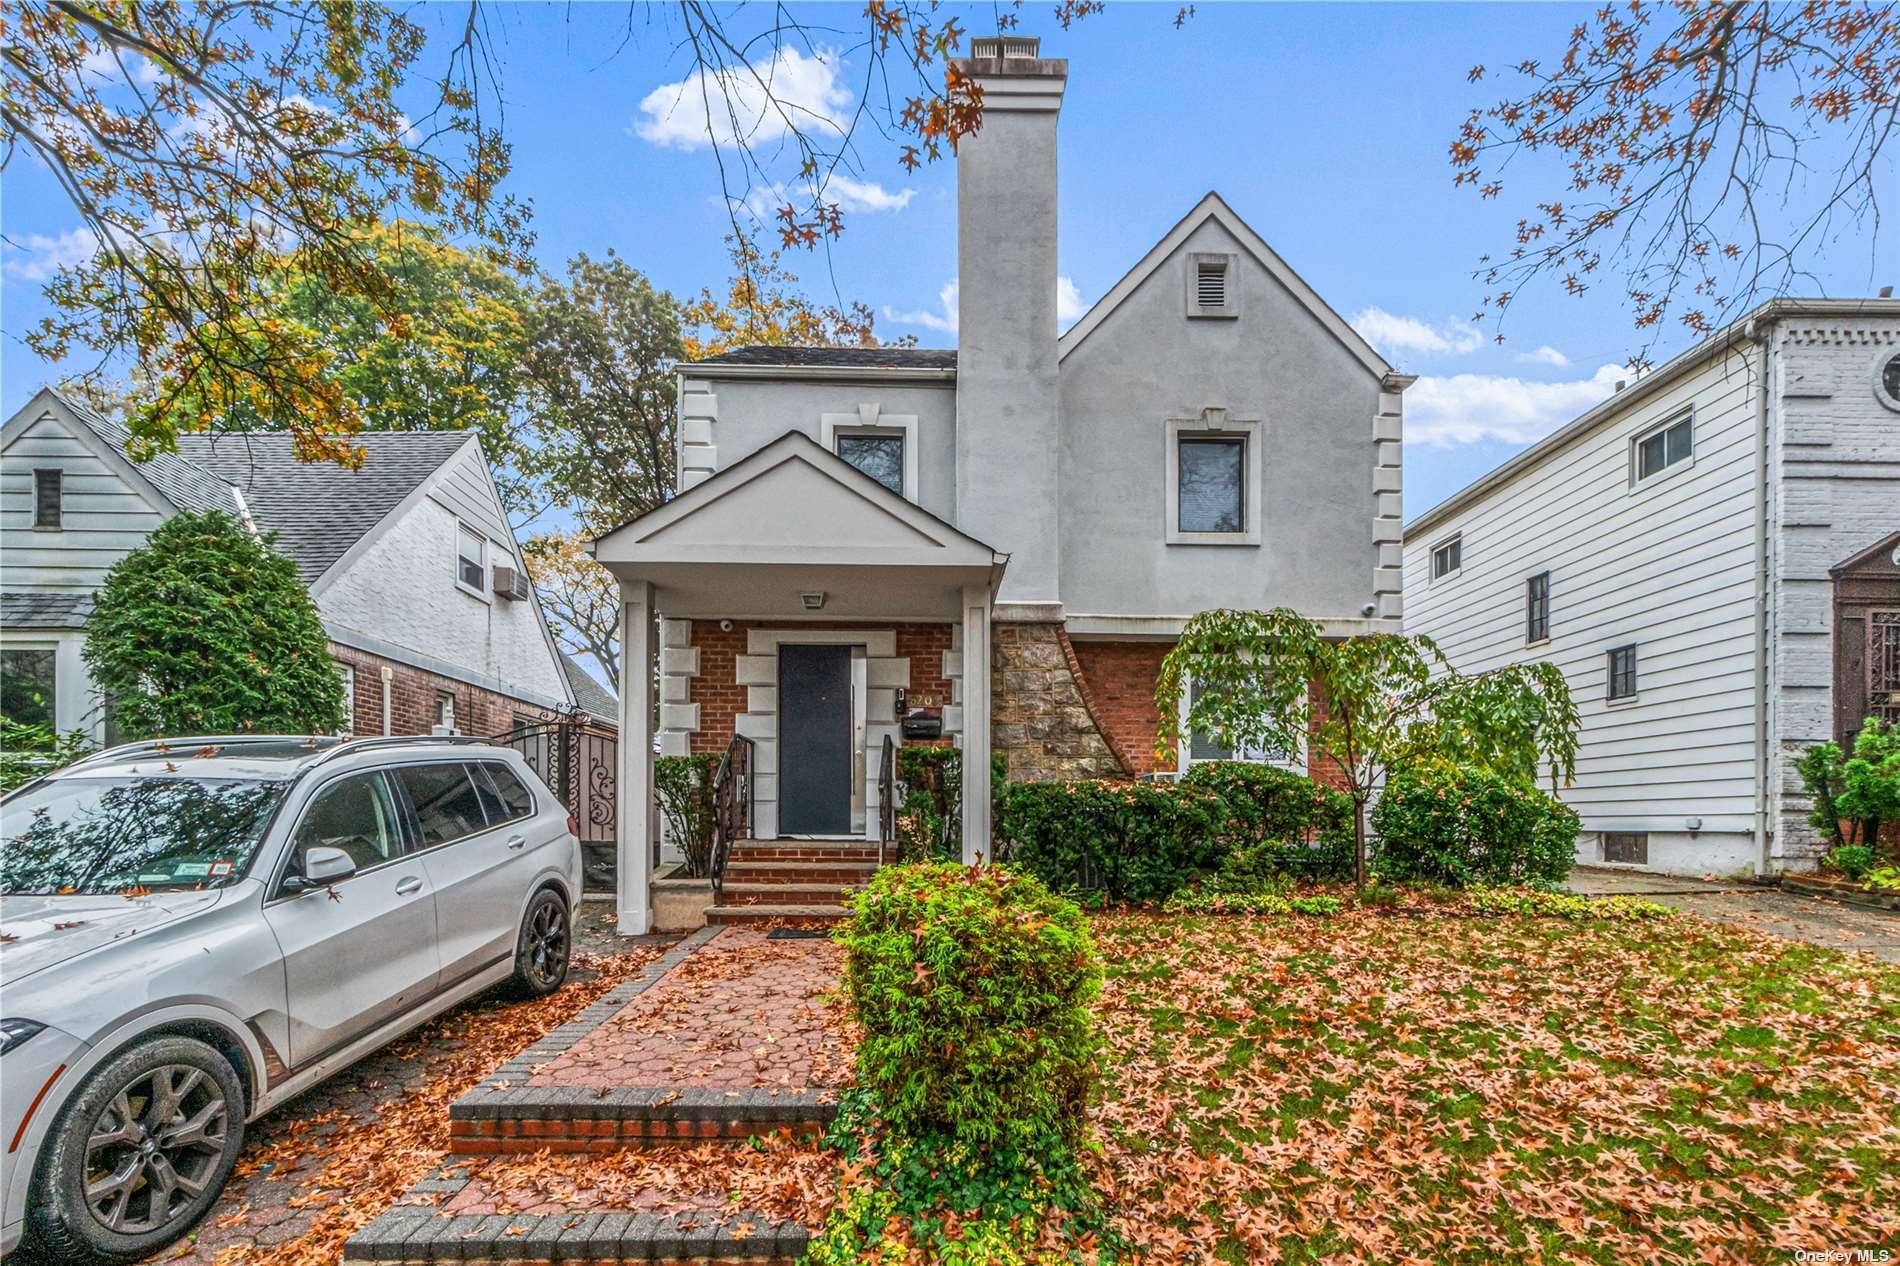 Welcome to this Magnificent and Extended detached brick upscale completely renovated 2021 top to bottom colonial house in the heart of Jamaica Estates.